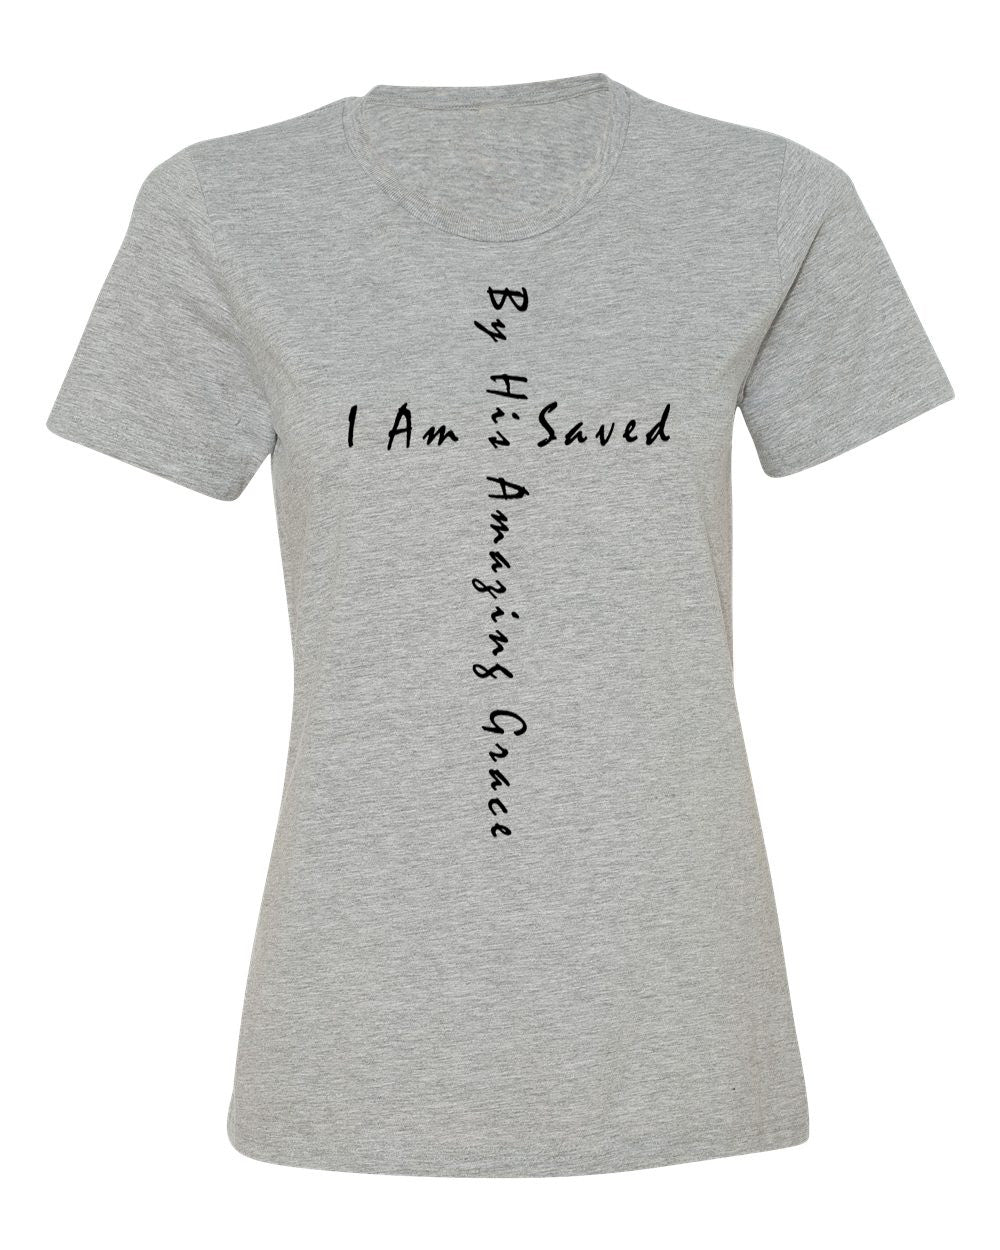 By His Grace I Am Saved Ladies Tee